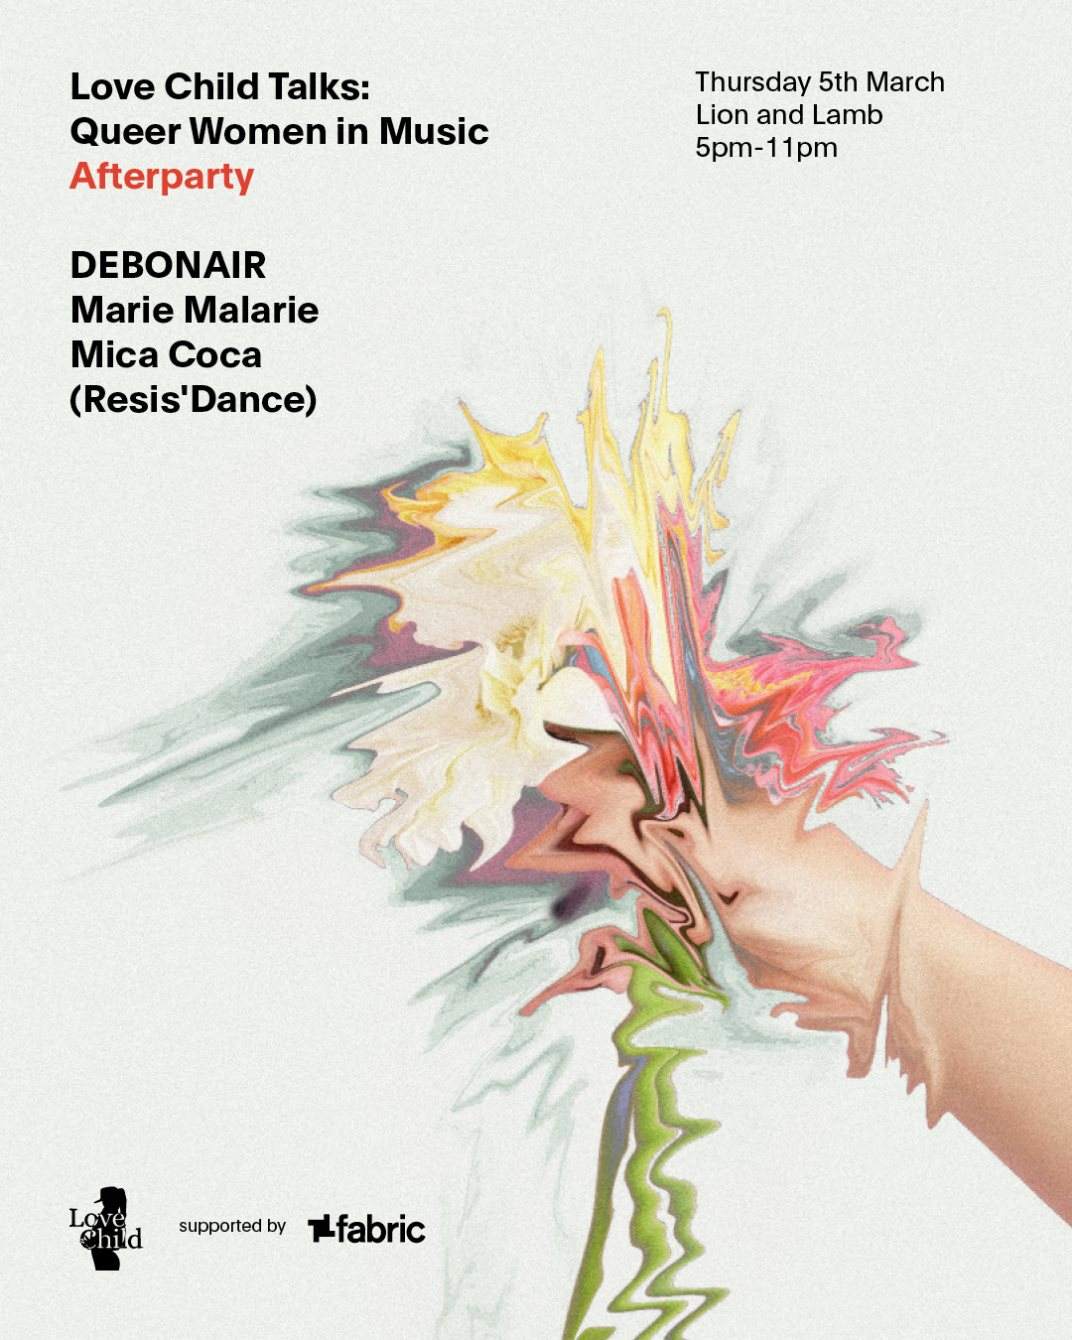 Love Child Talks Free Afterparty with DEBONAIR and More - Página frontal